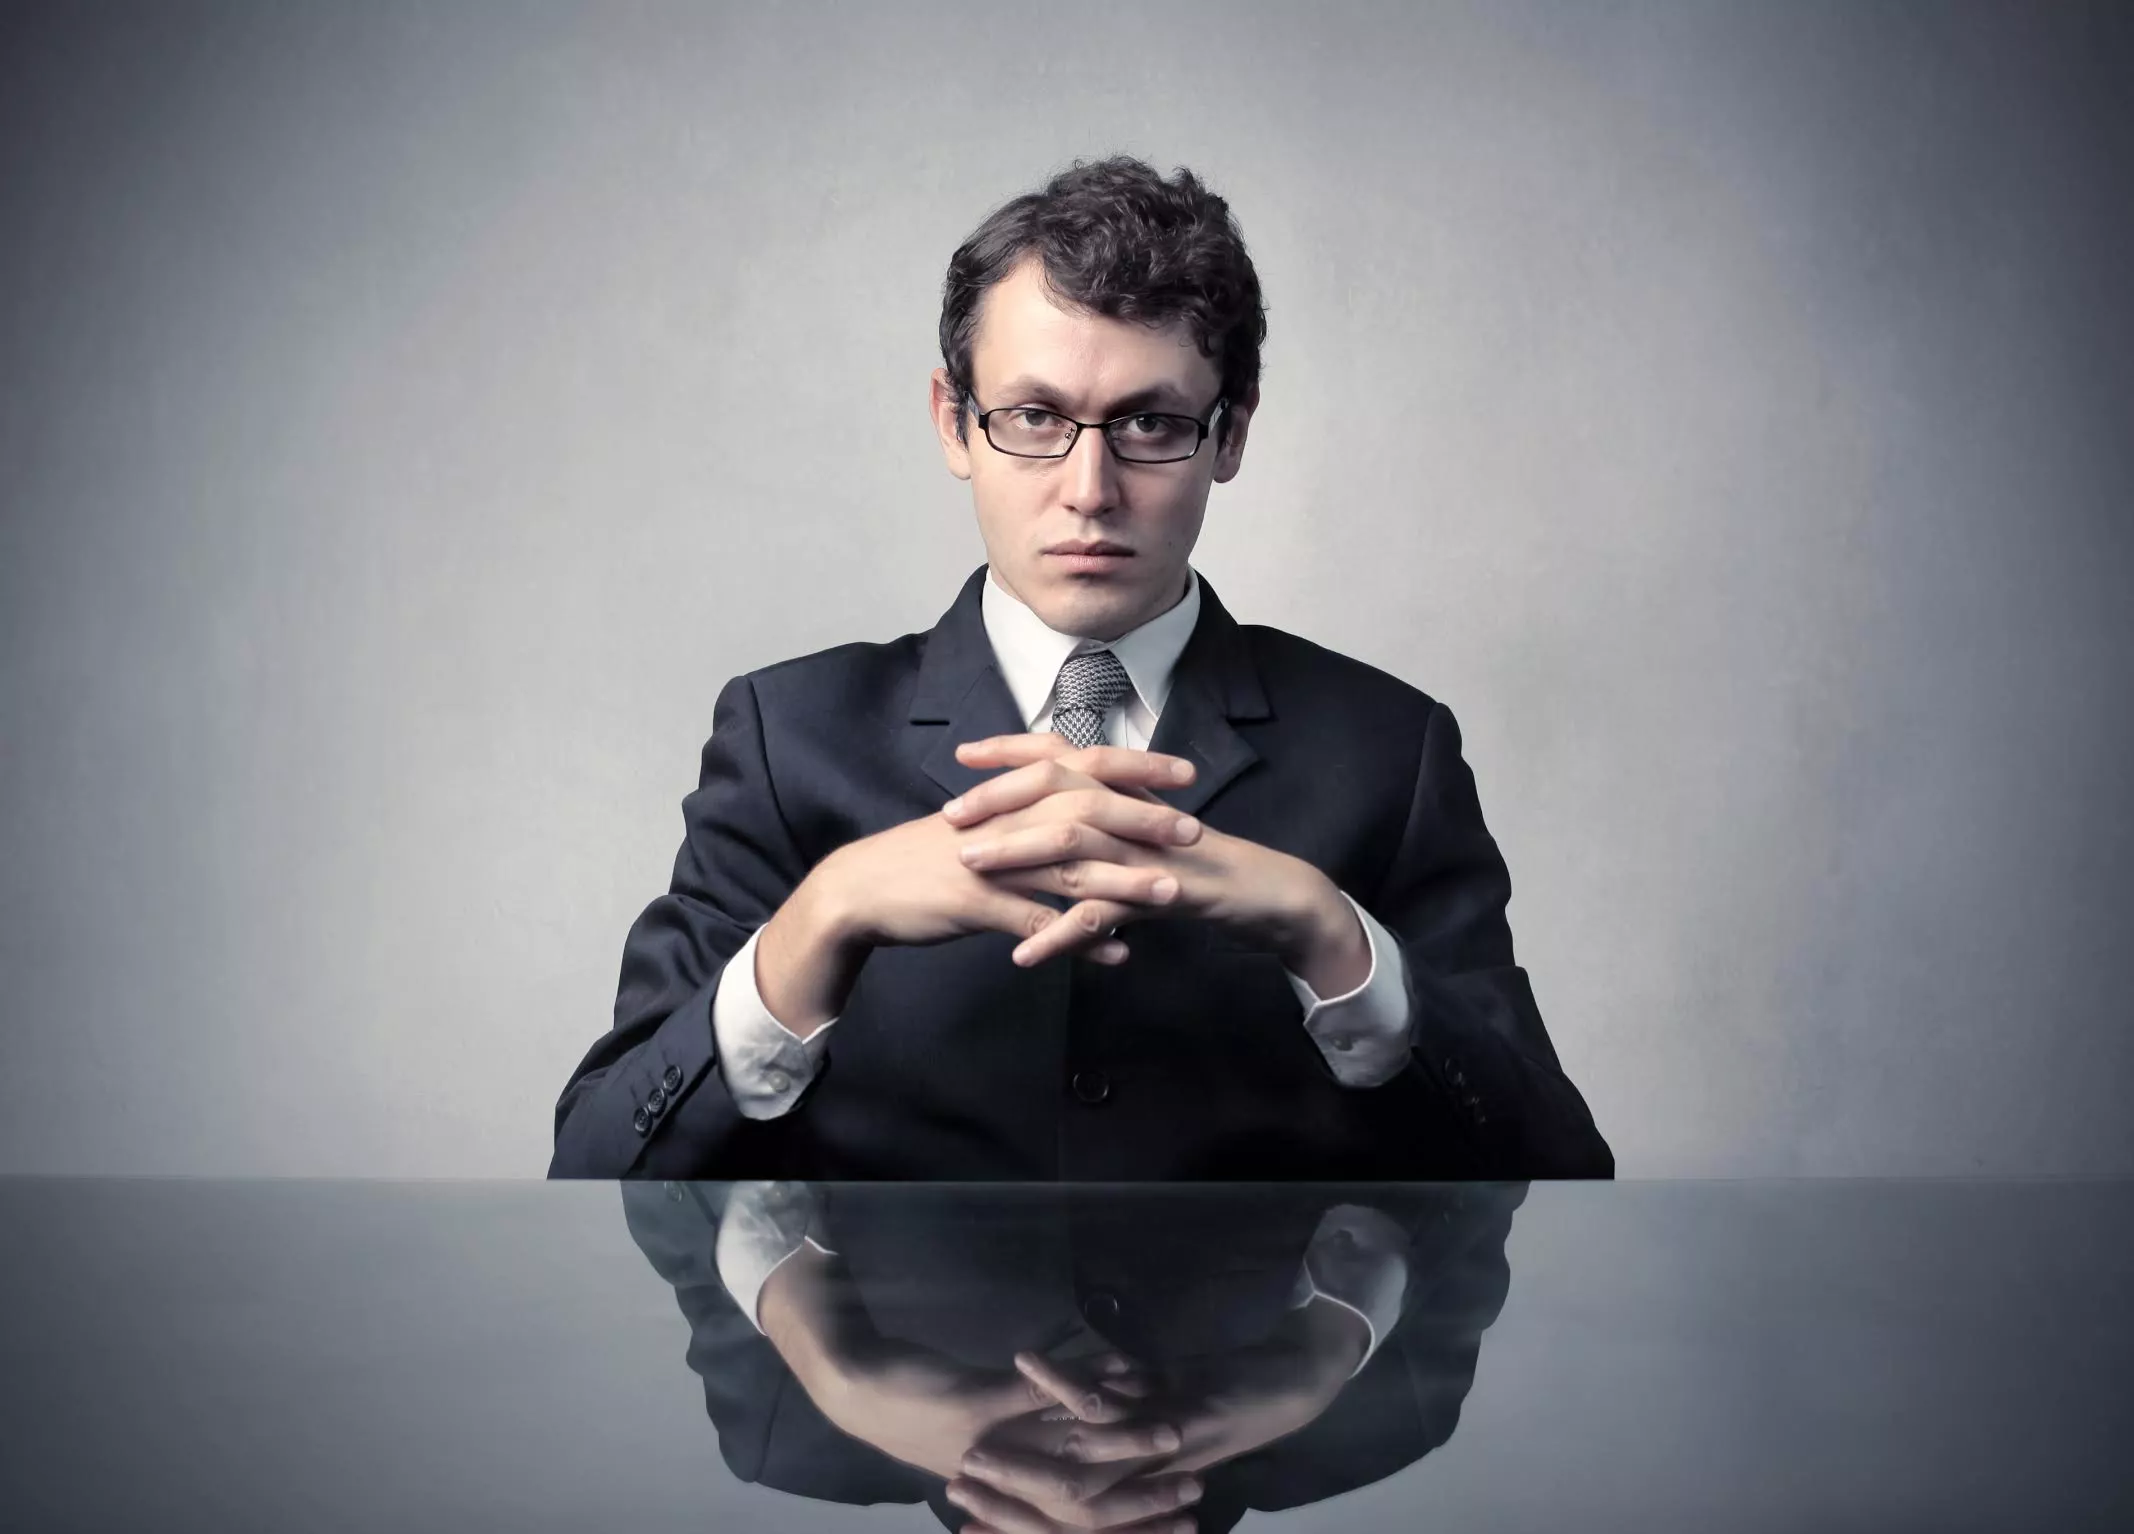 Serious-faced man sitting at table, clasping hands. Image: Shutterstock via Giles Pegram